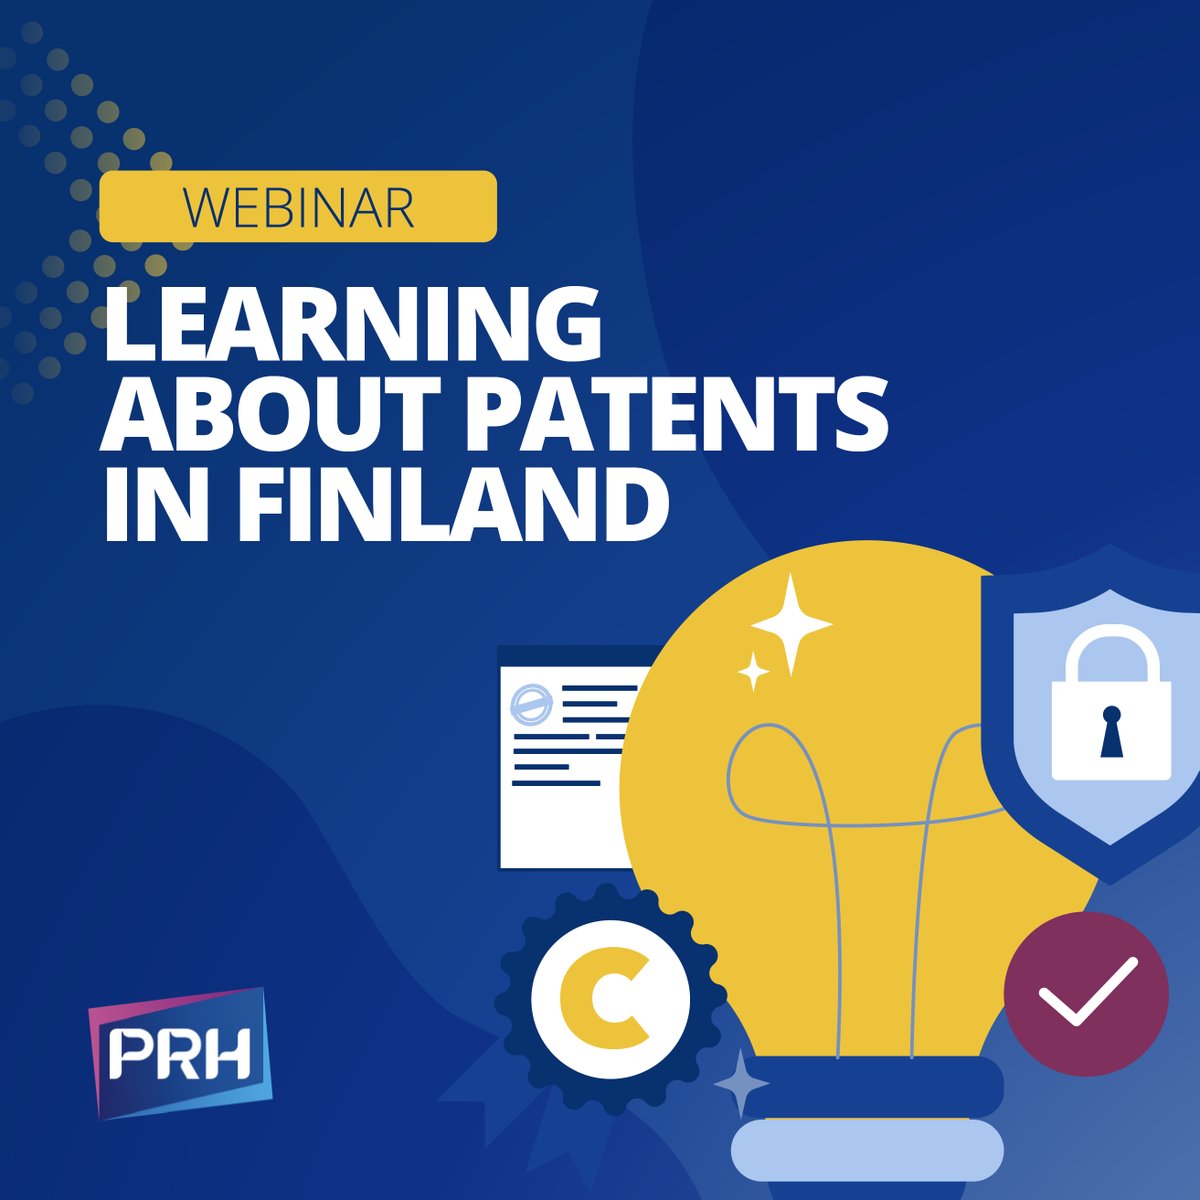 ONLINE EVENT (in Finnish) 🇫🇮 – “Learning about patents in Finland” organised by the Finnish Patent and Registration Office @prh_fi 📅 🕙 14 May; 08:30 - 09:15 🖱️Register here business.ideaspowered.eu/events/learnin…